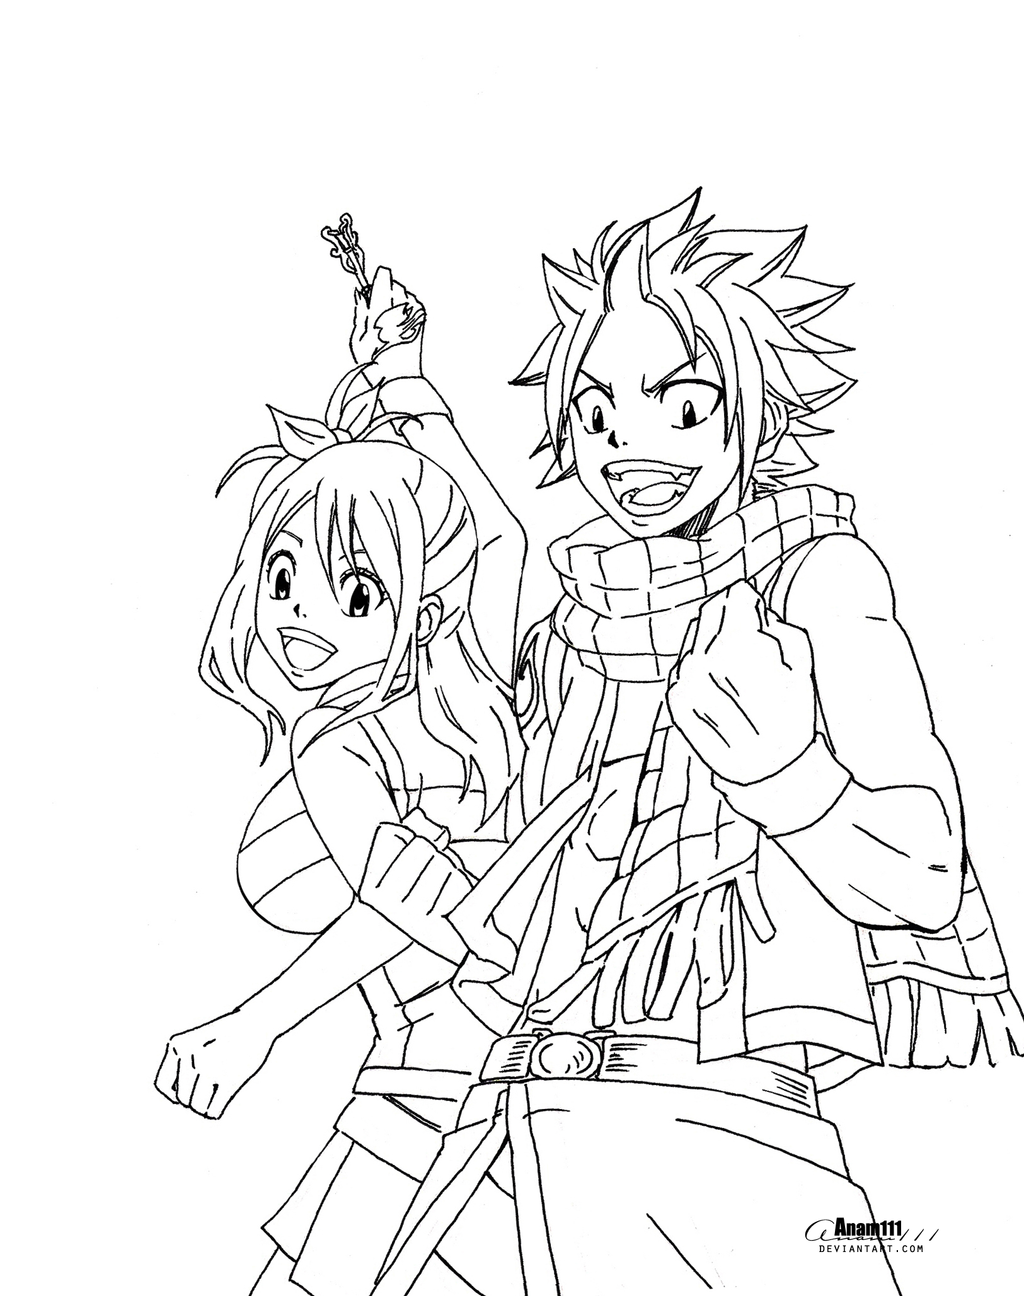 natsu and lucy , no coloring by Anam111 on DeviantArt